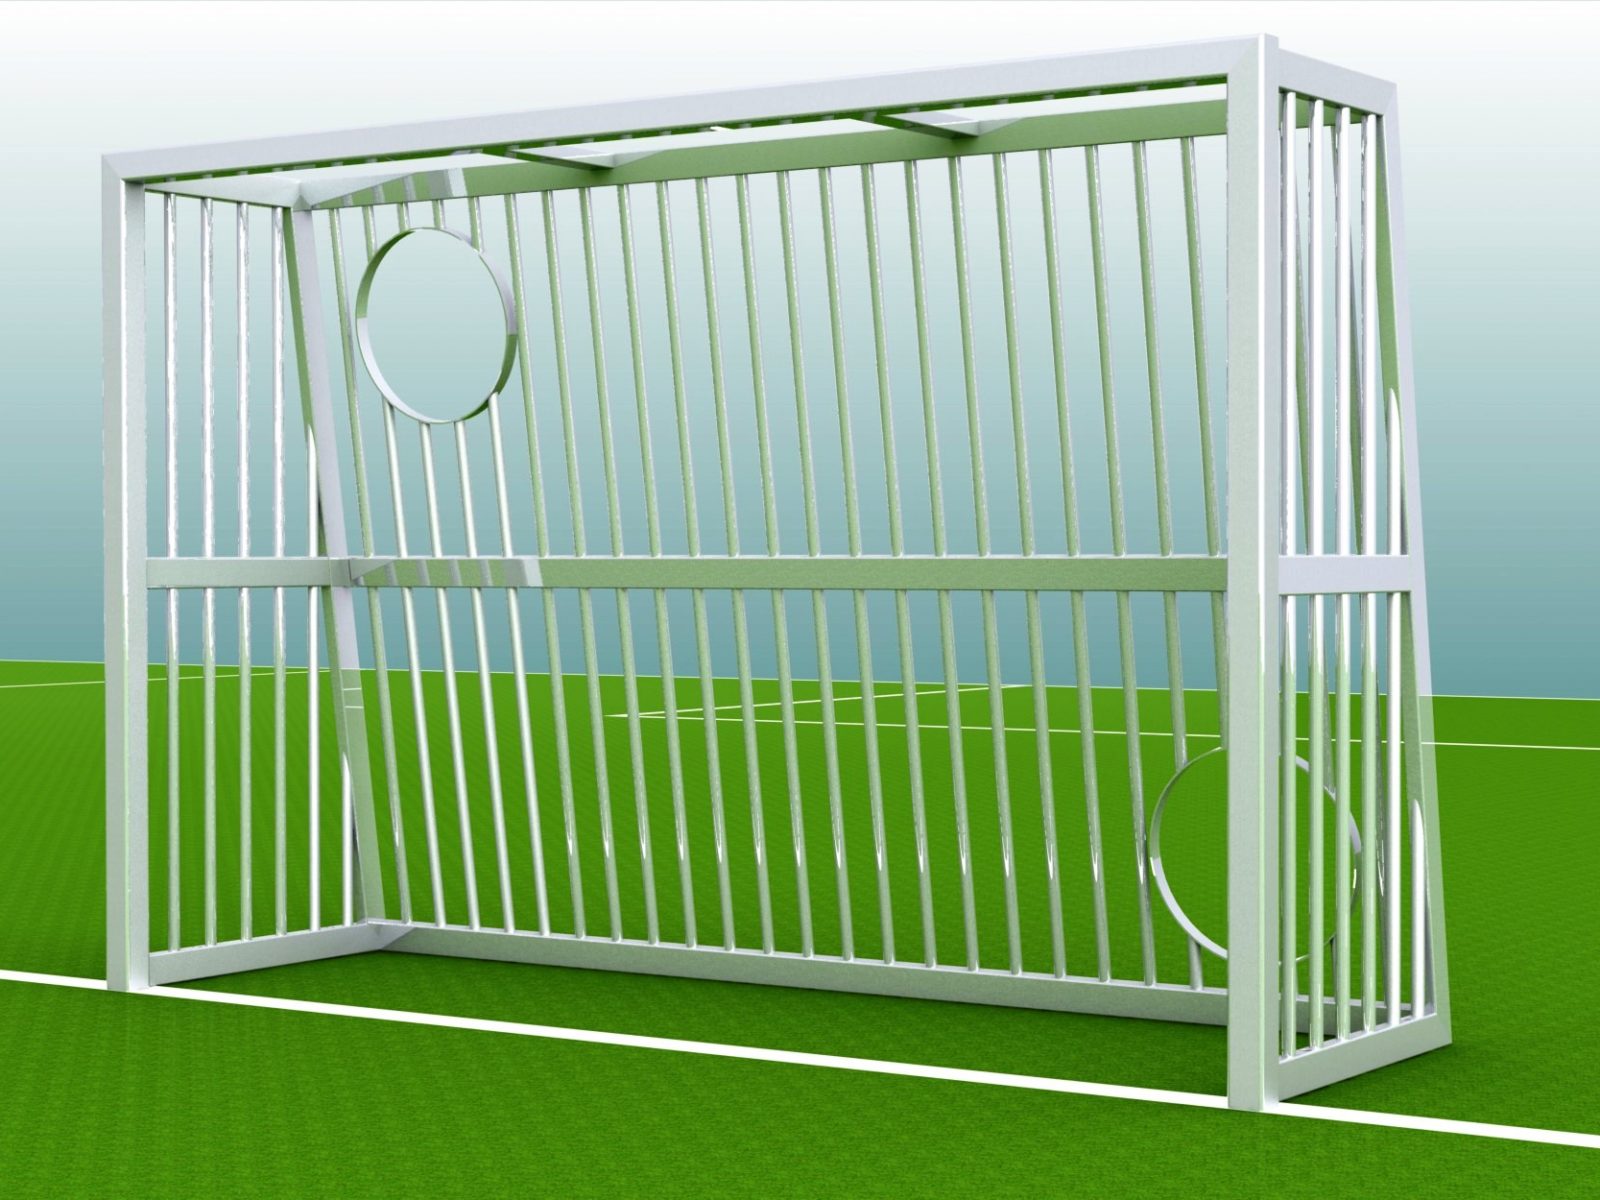 Fully welded recreational goal with goal wall